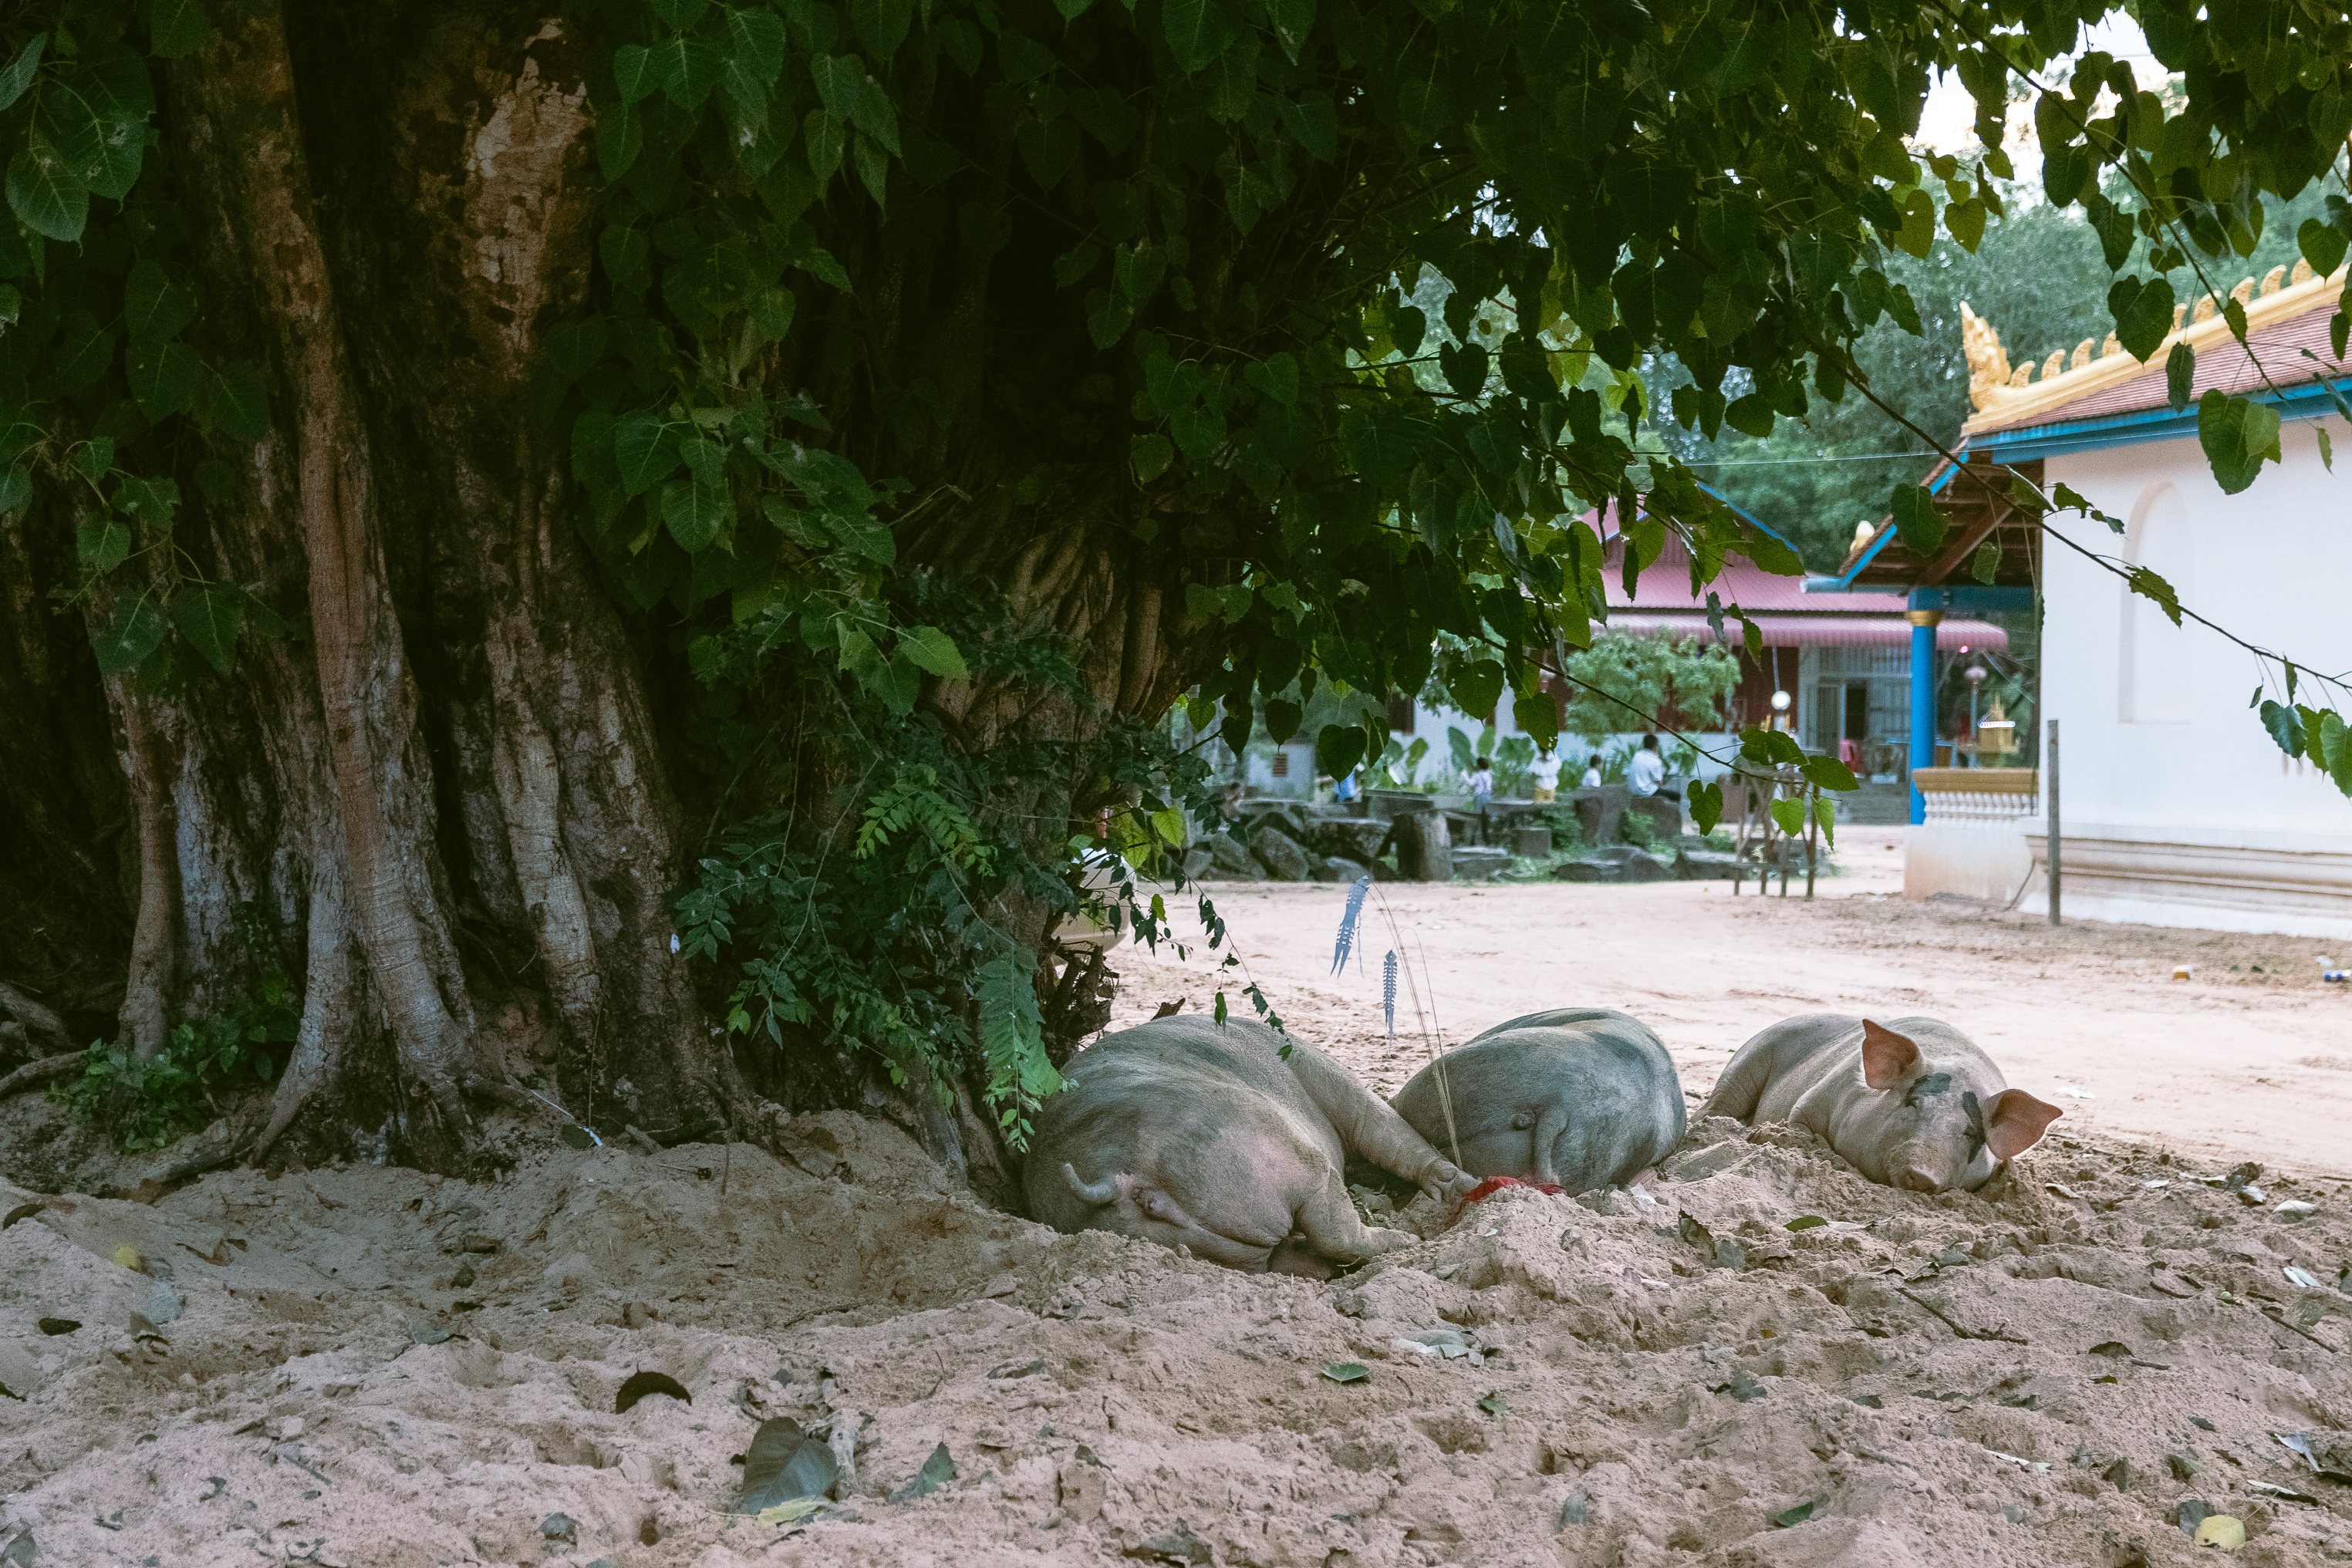 pigs lying under a tree in a Vietnam town